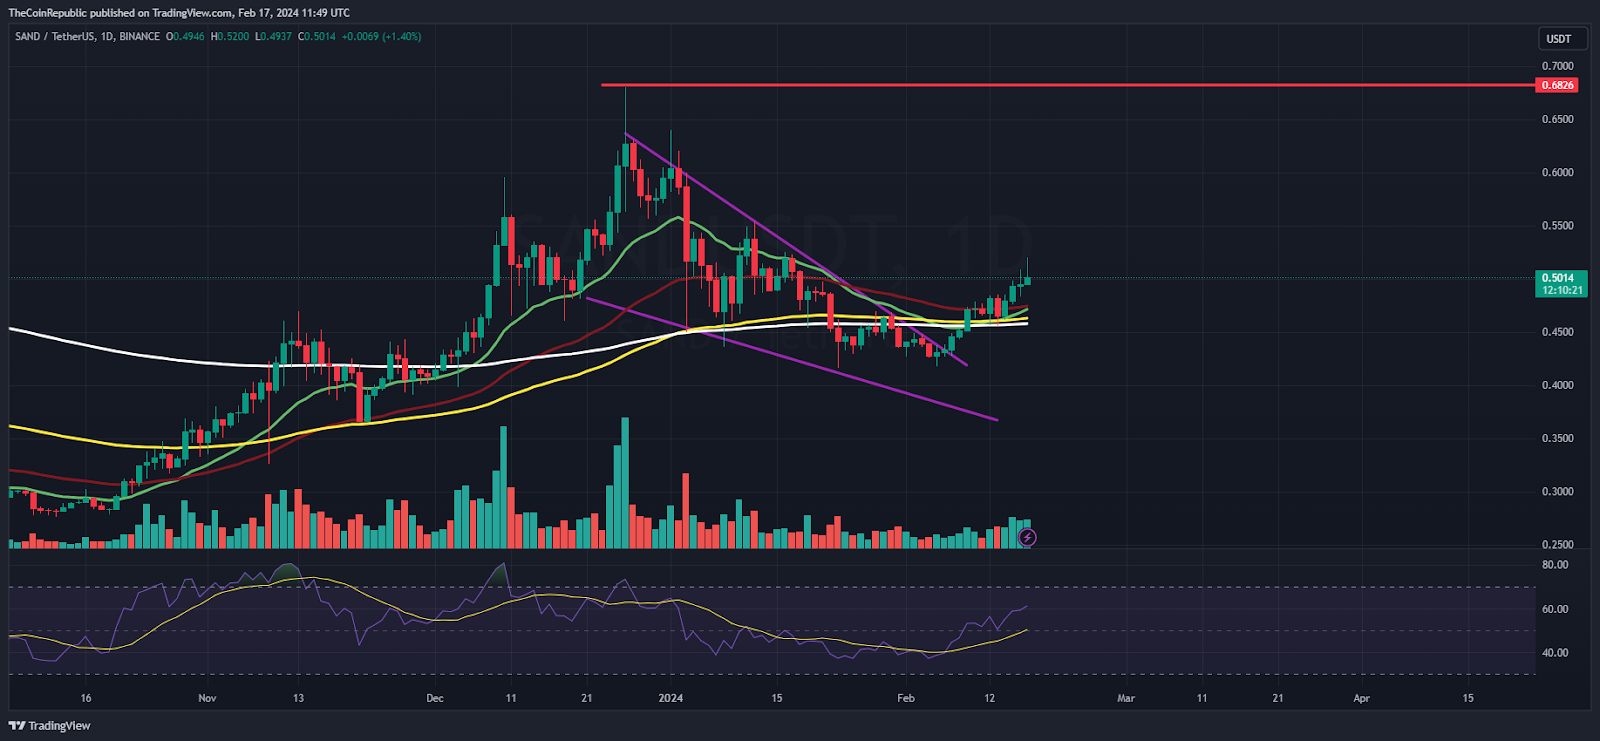 SAND Token Noted a Reversal; Will It Retain the Upside of $0.7000?